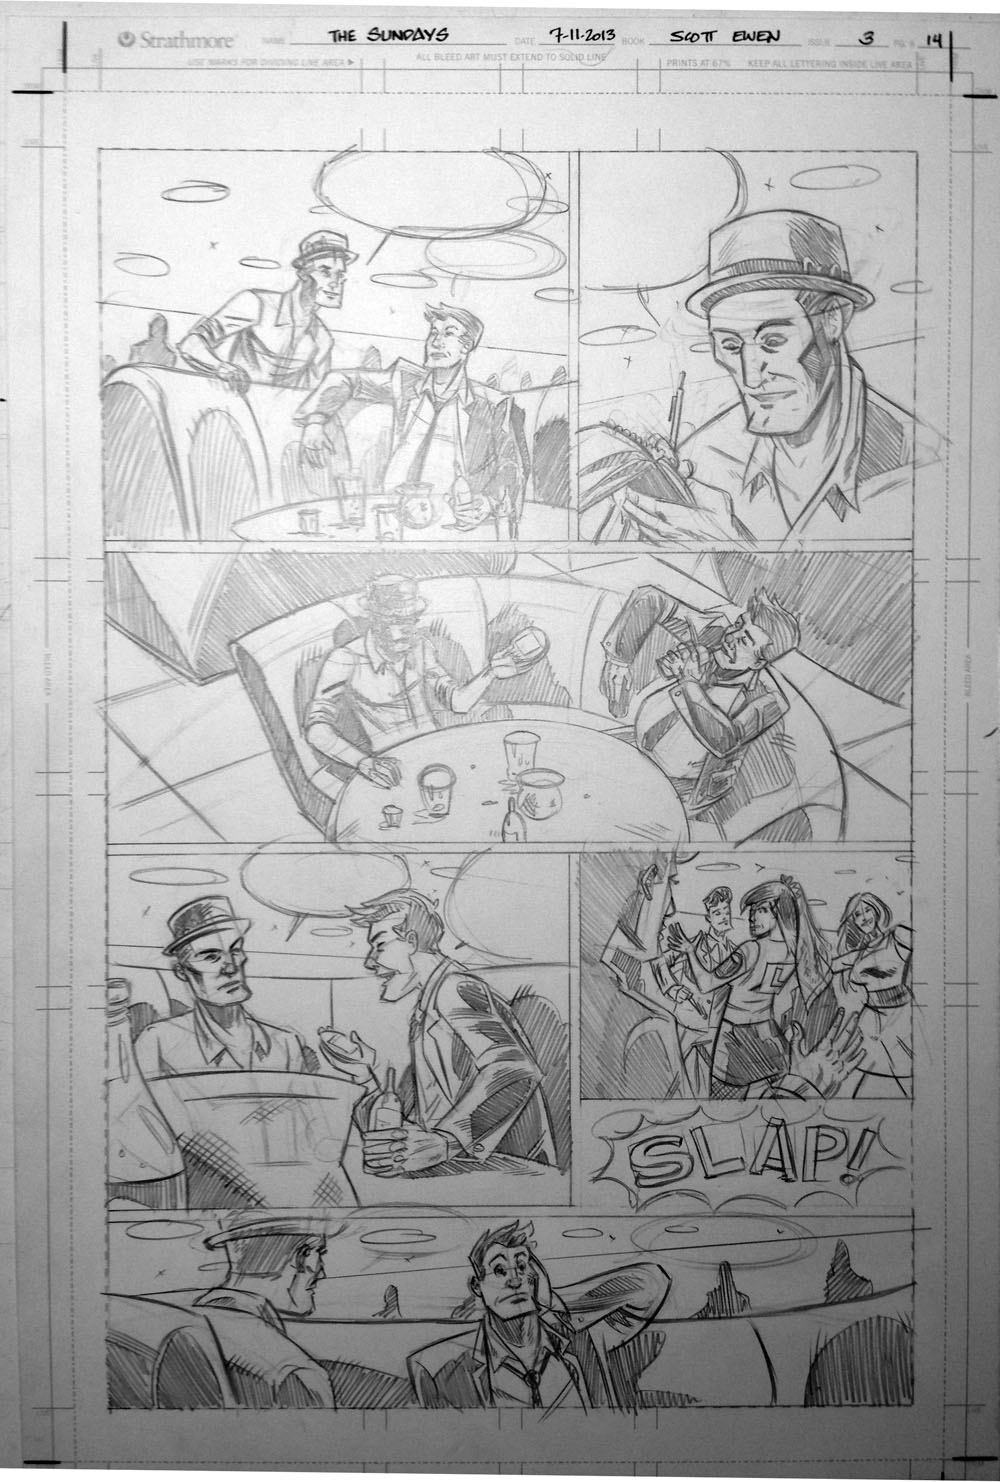 the_sundays__3_page_14_pencils_by_scottewen-d6e8sle.jpg